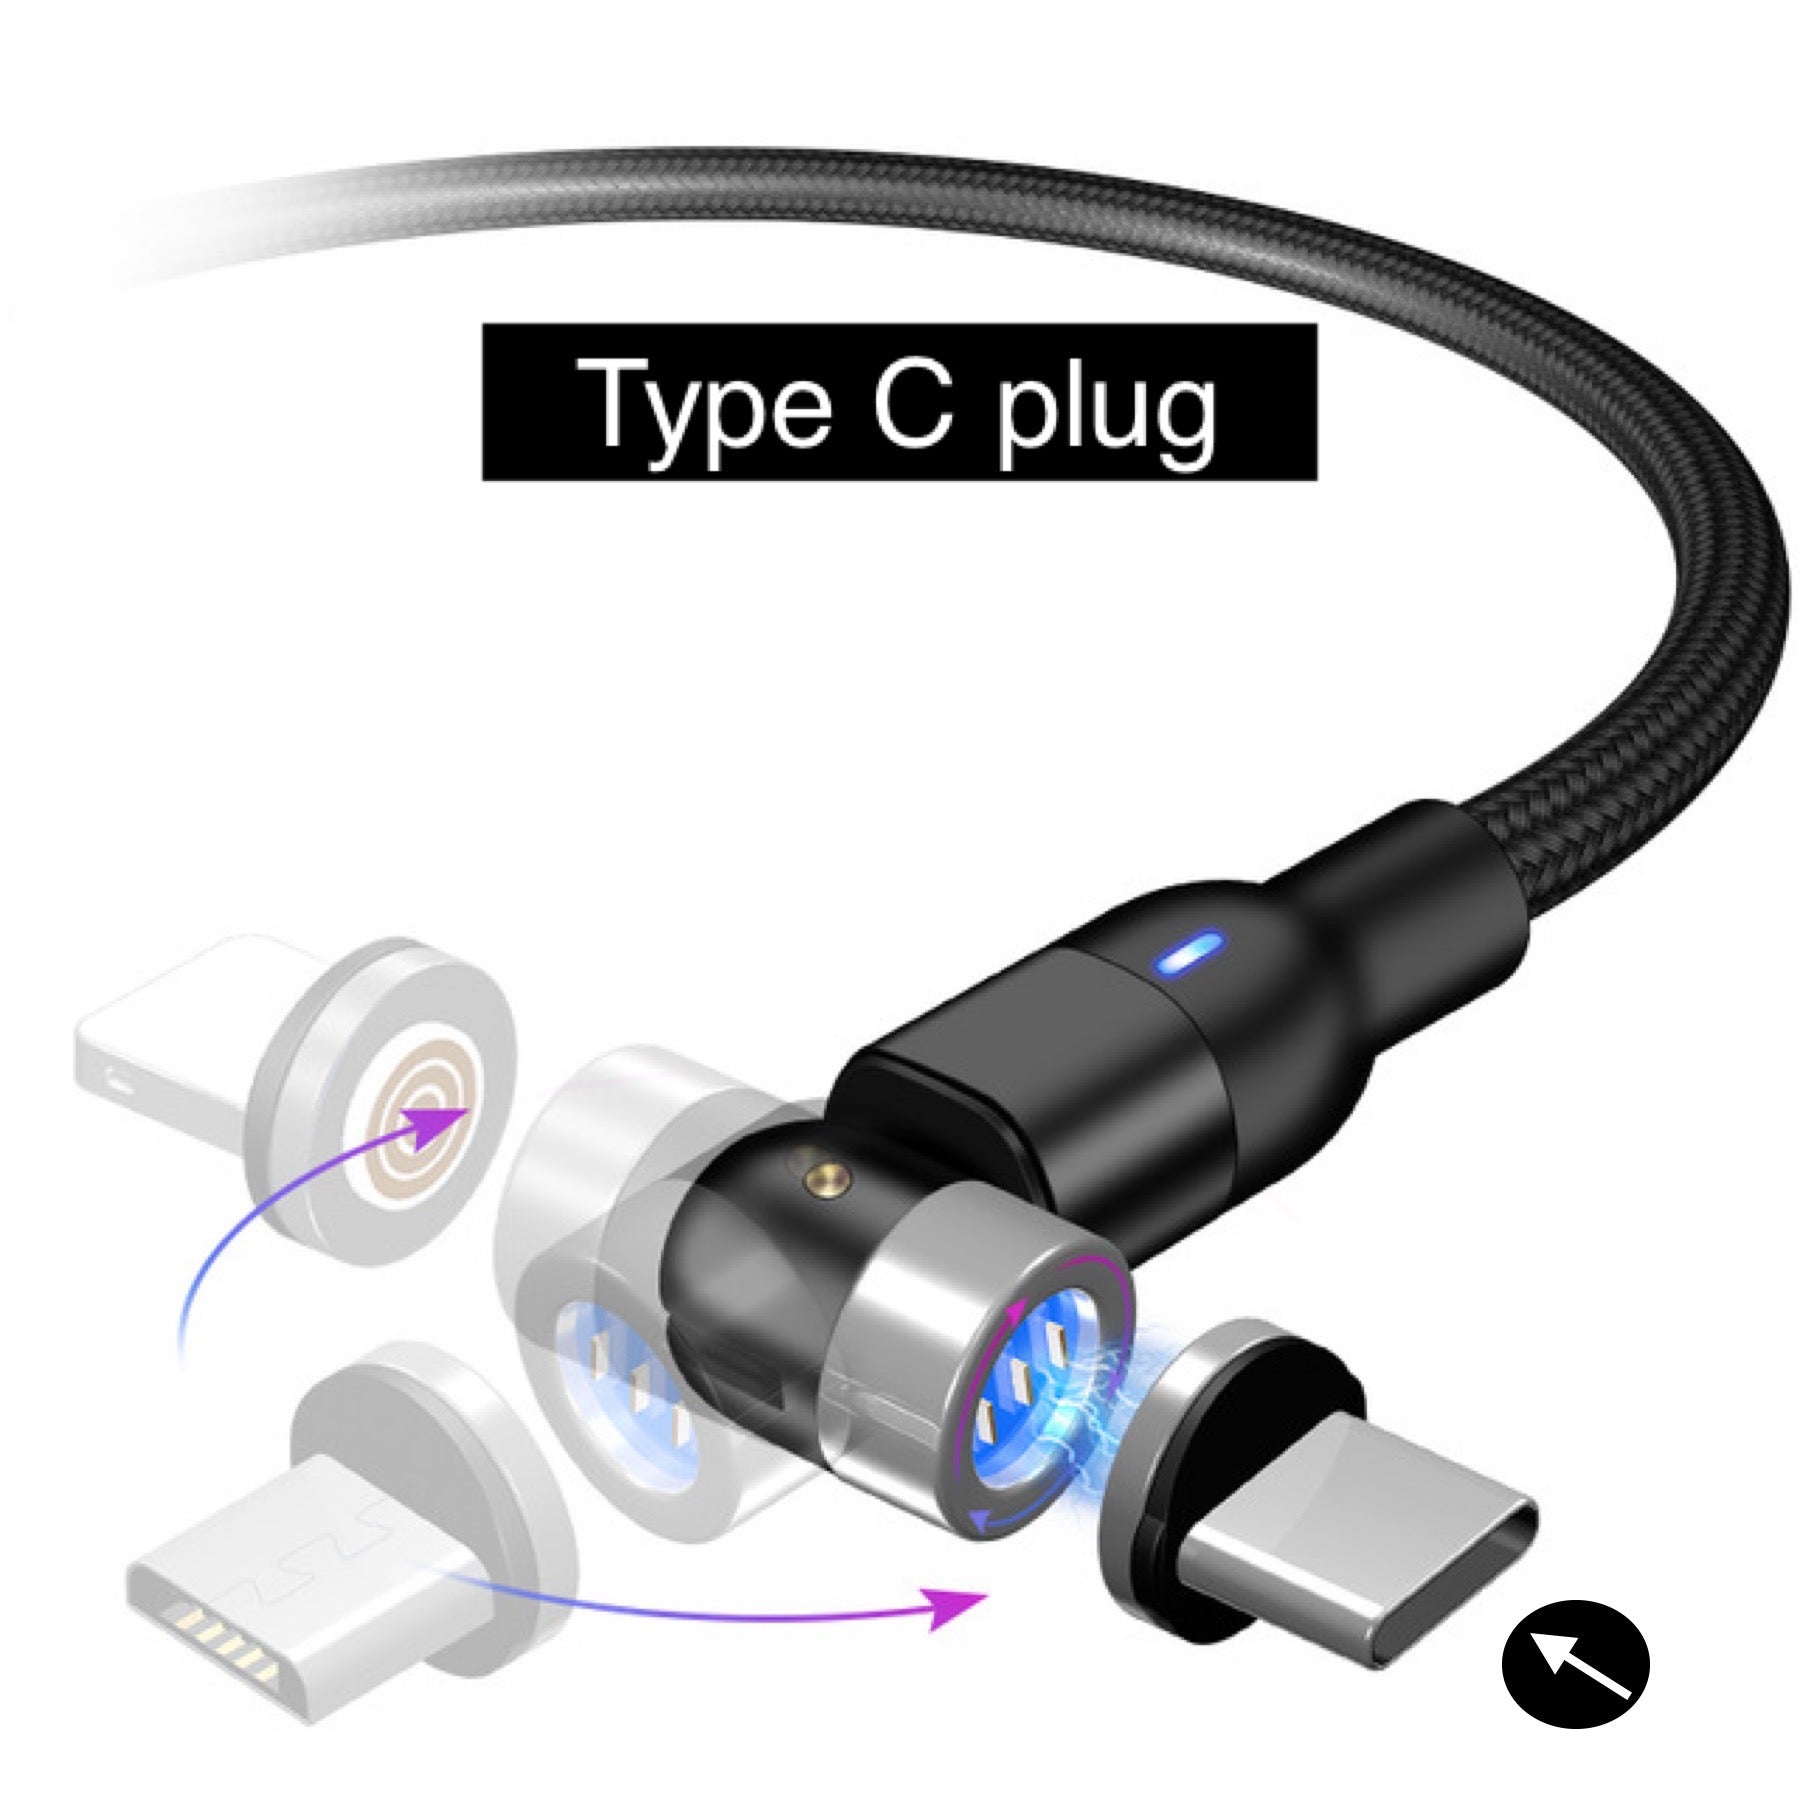 Type C Samsung Android Magnetic 540 degree Rotating Rotational Charger Cable Black